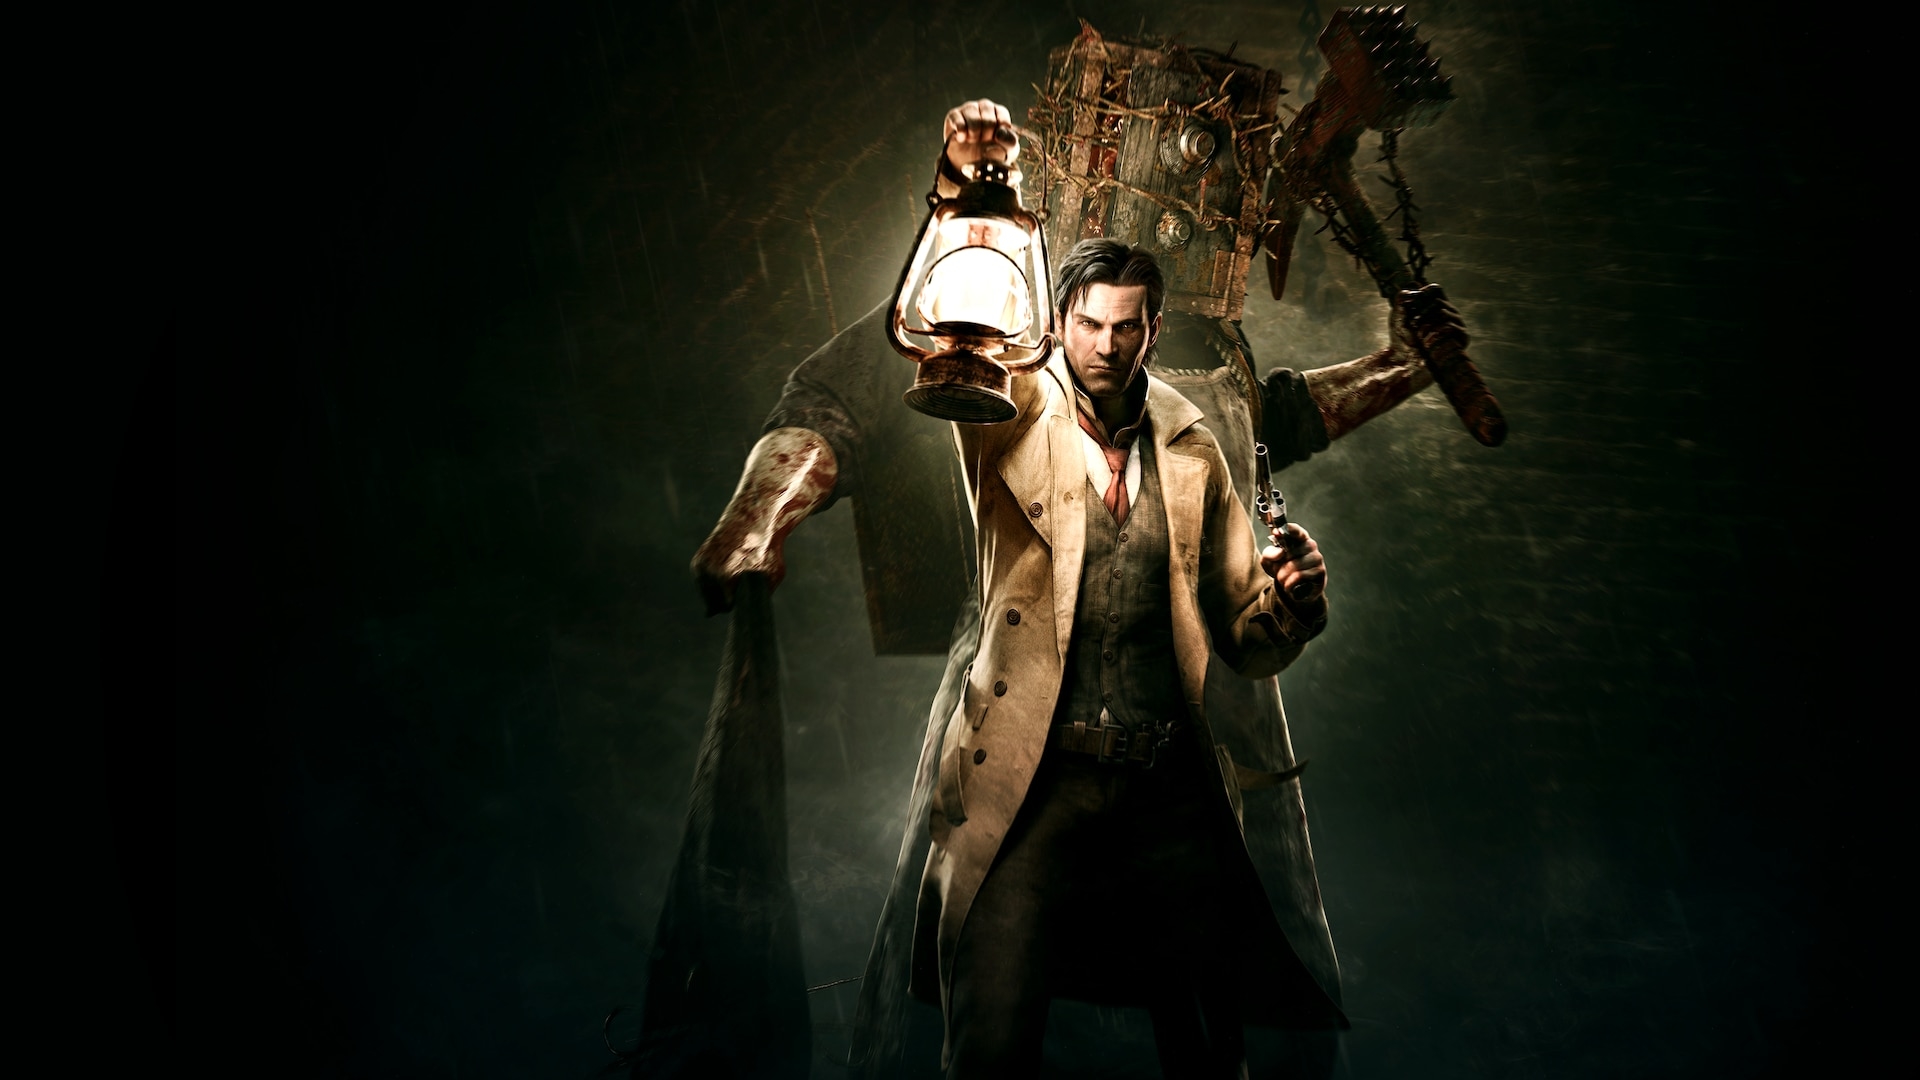 The Evil Within Poster Wallpaper, HD Games 4K Wallpapers, Images and ...